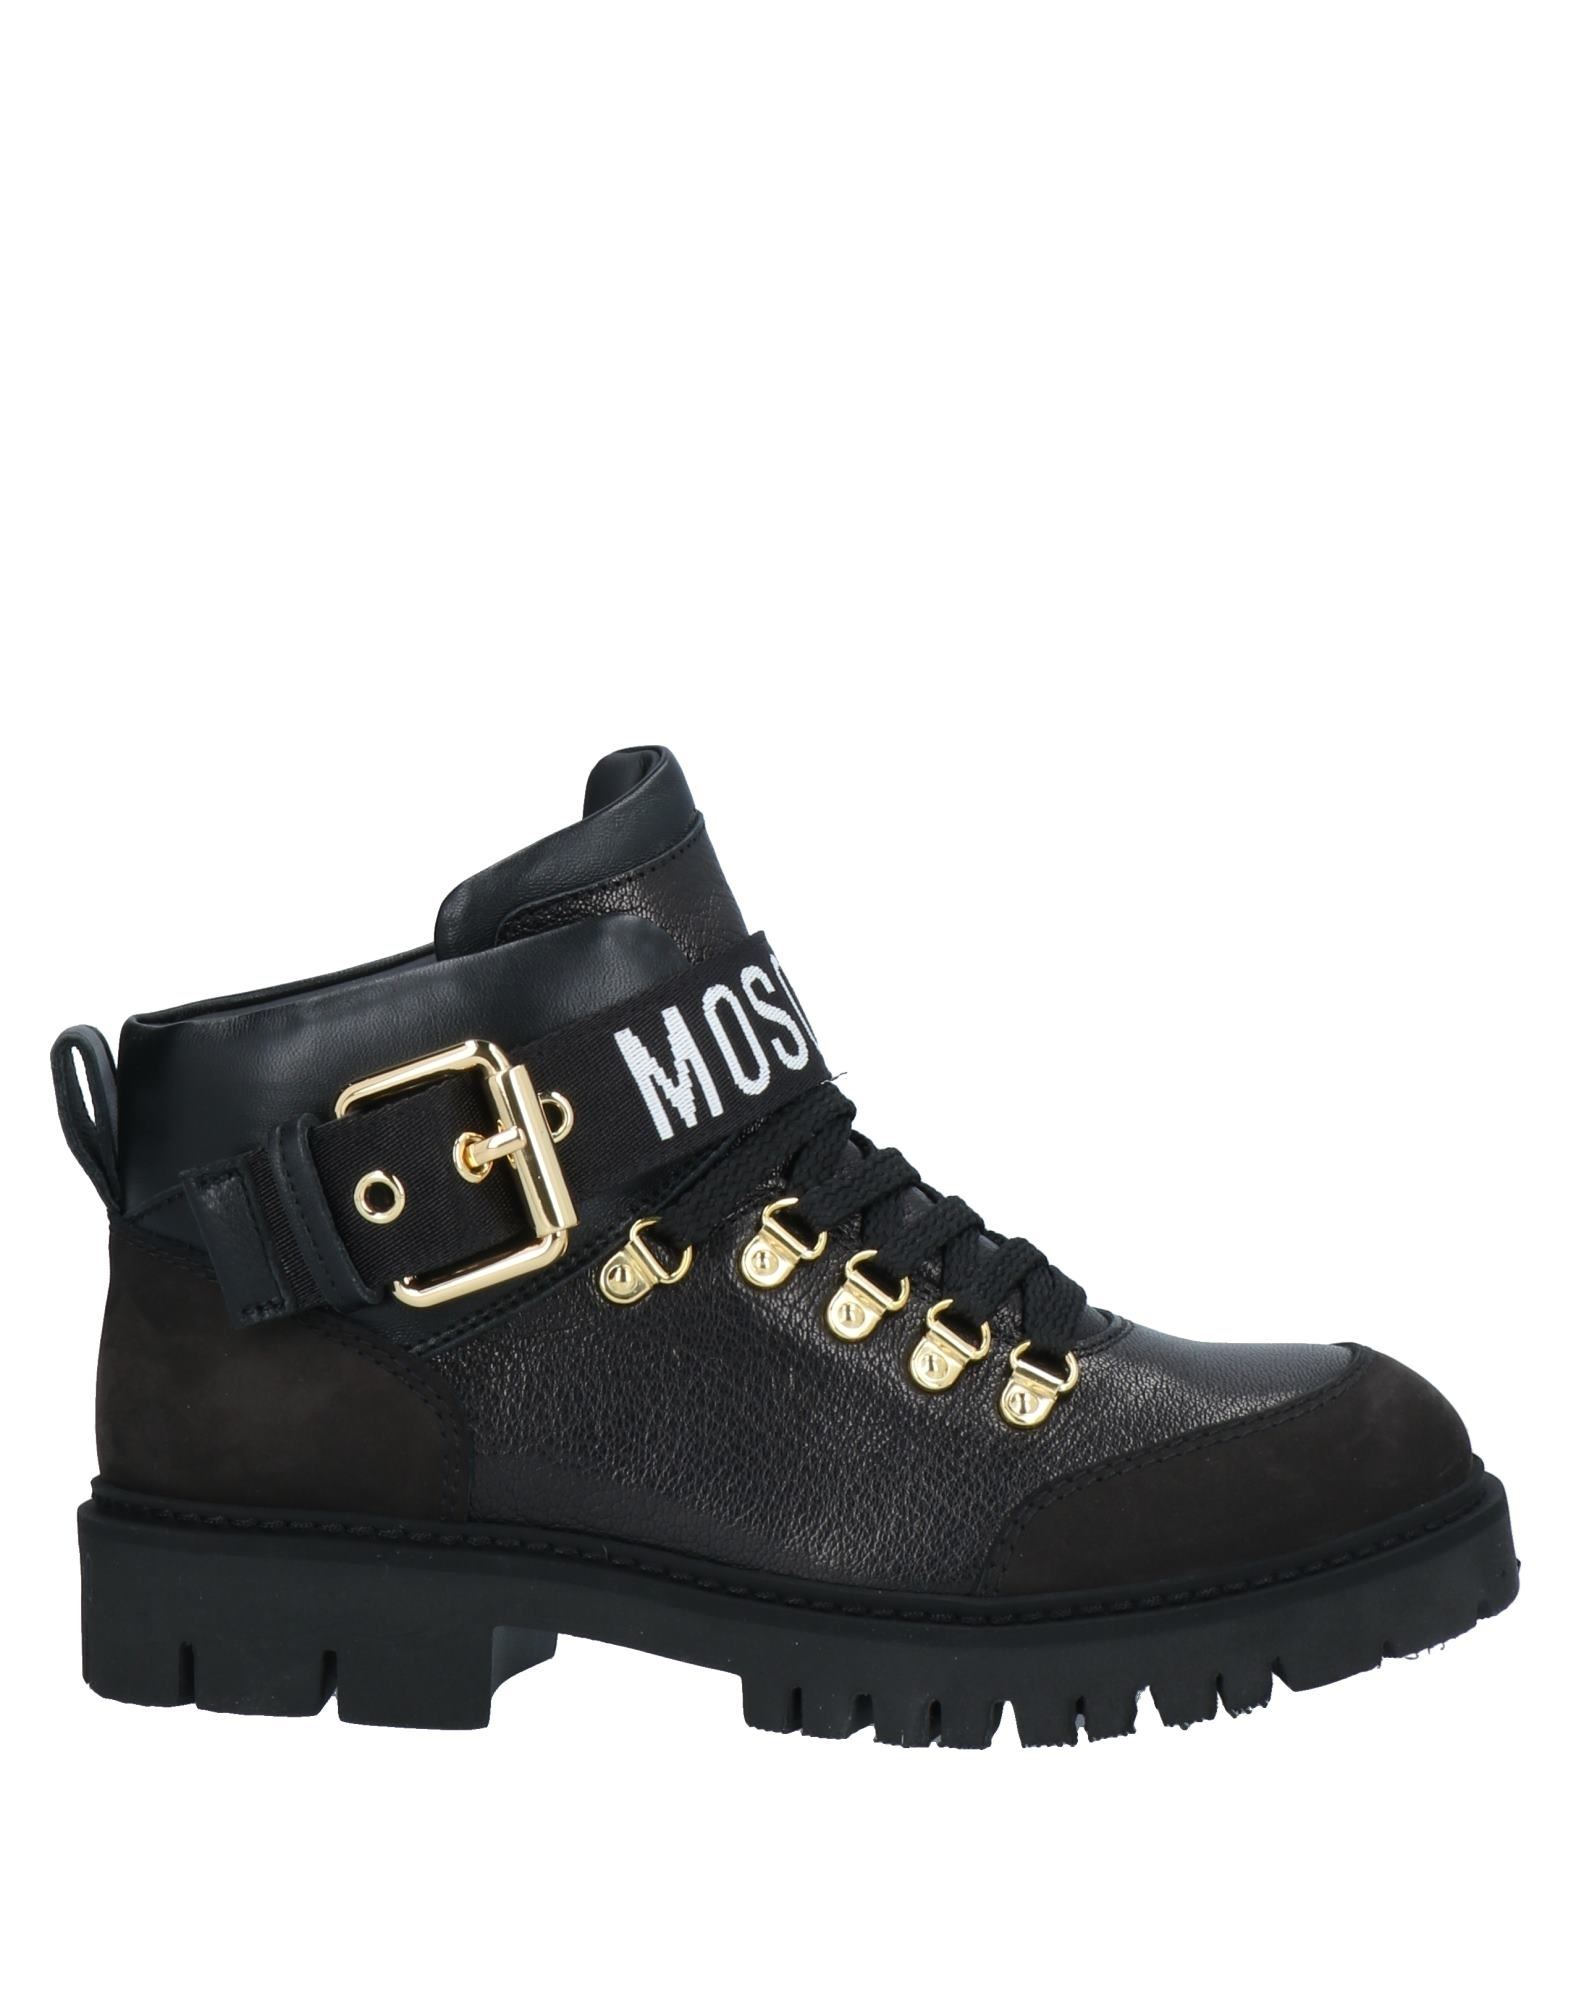 Moschino Black Brick40 Ankle Boots | ModeSens